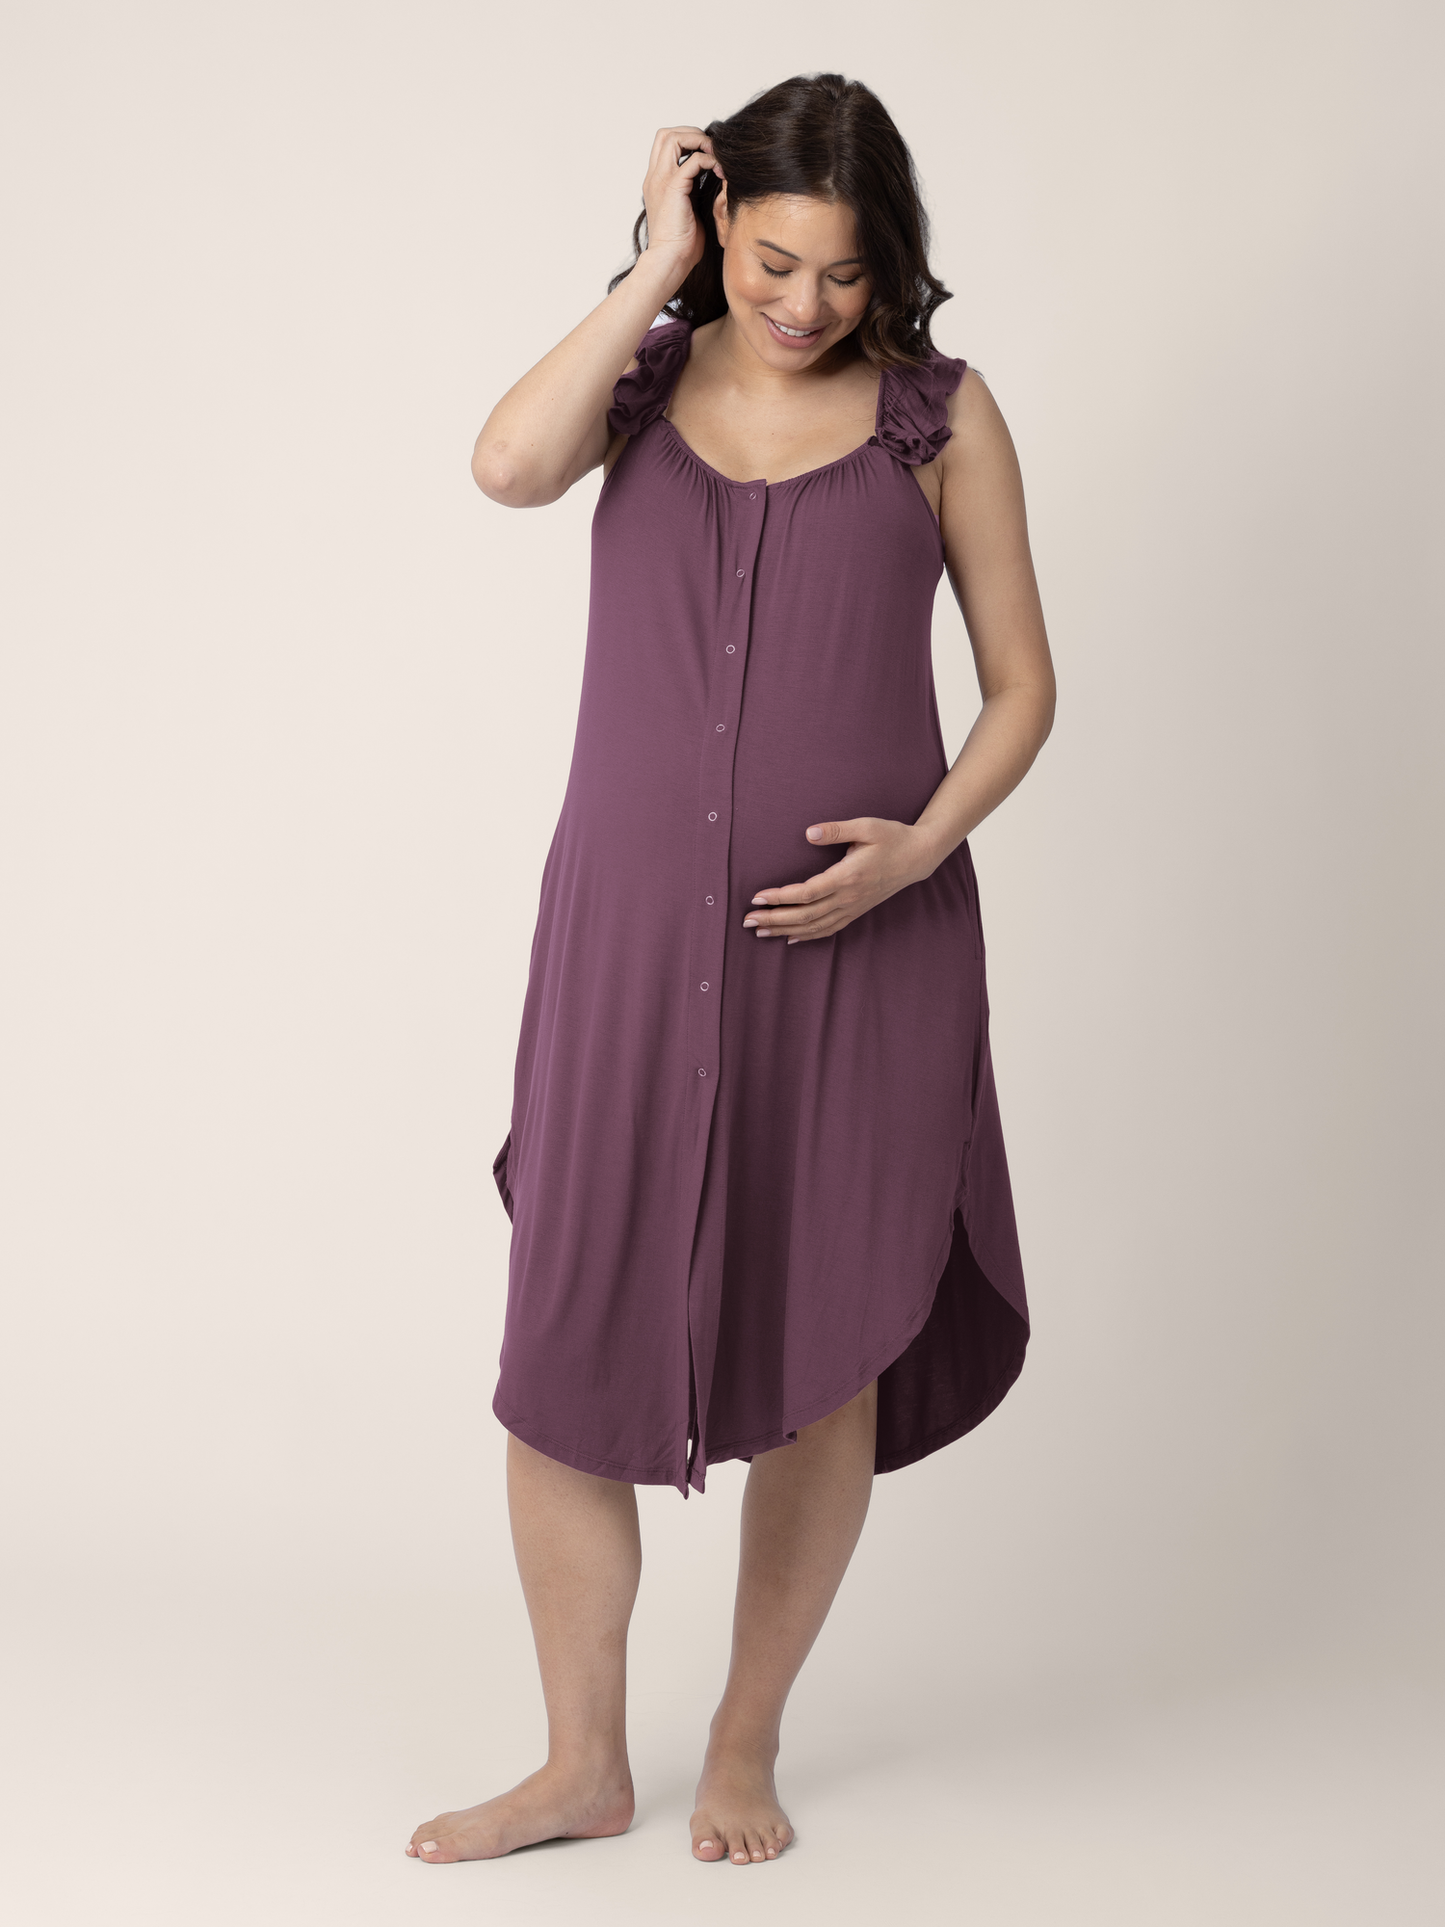 Model wearing the Ruffle Strap Labor & Delivery Gown in Burgundy Plum with her hand on her stomach. @model_info:Vanessa is 5'8" and wearing an XS/S.